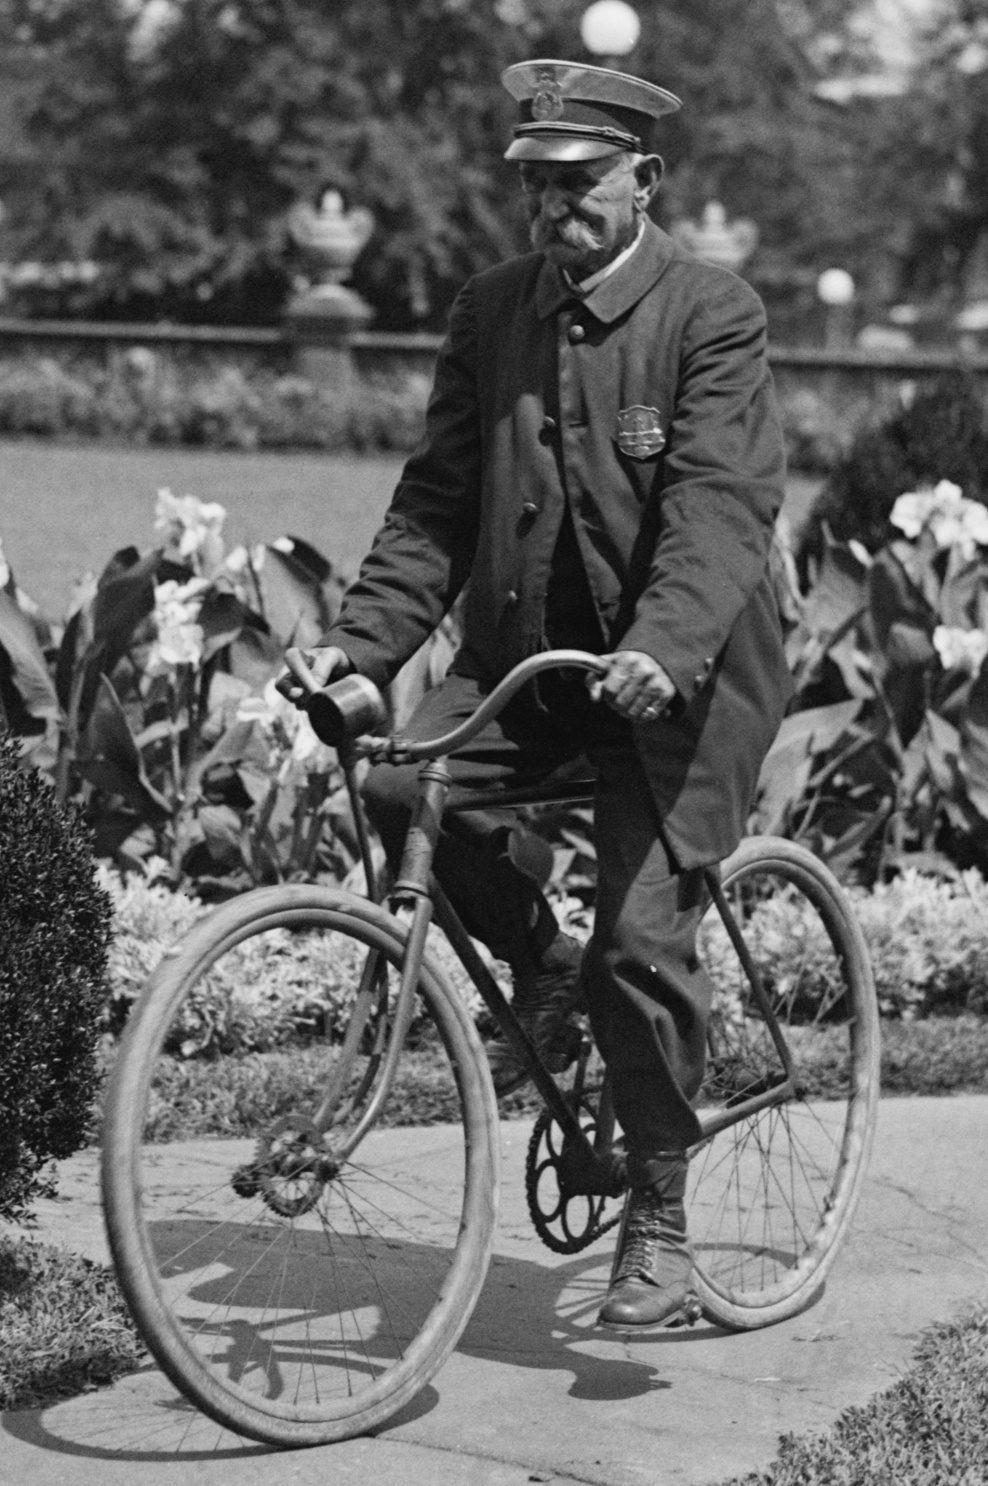 an old black and white pograph of a man on a bicycle